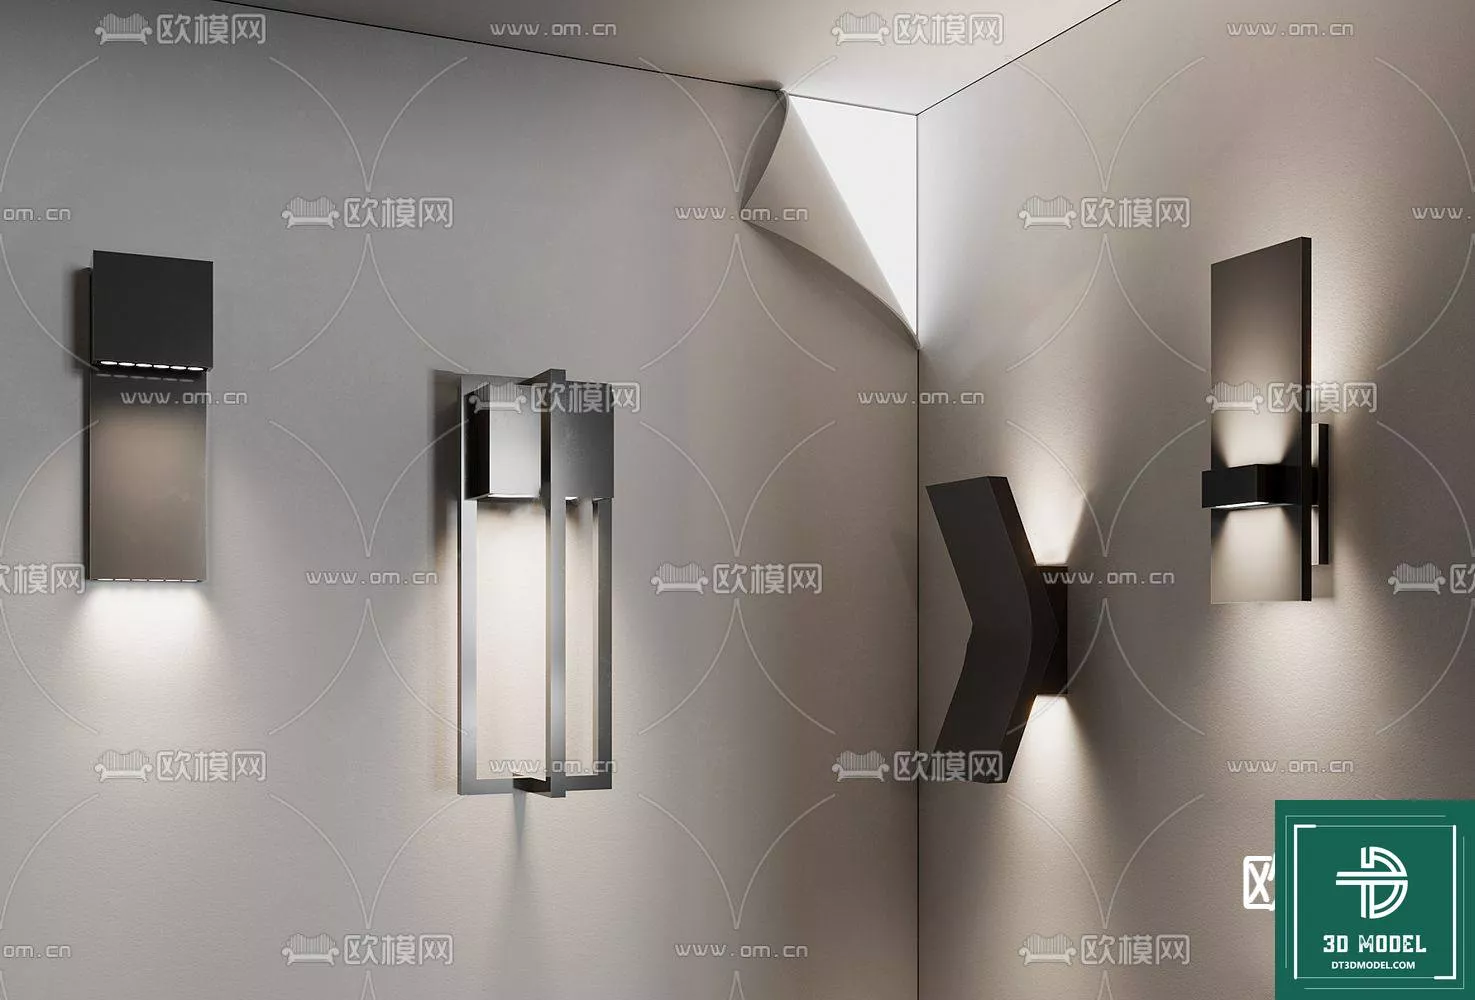 MODERN WALL LAMP - SKETCHUP 3D MODEL - VRAY OR ENSCAPE - ID16053